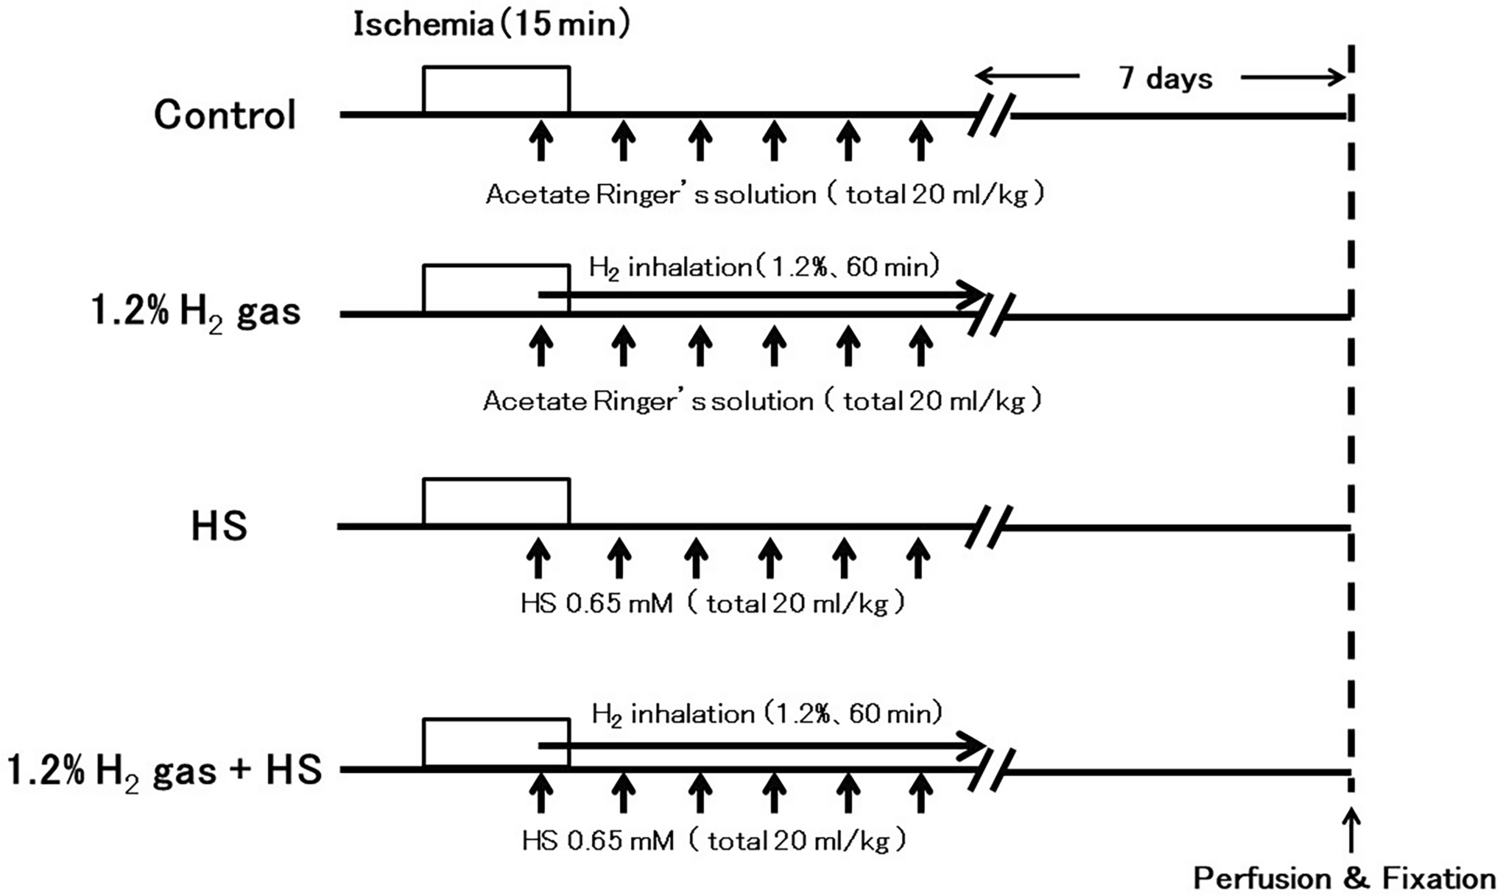 The combination of hydrogen gas and hydrogen-rich solution does not protect against ischemic spinal cord injury in rabbits